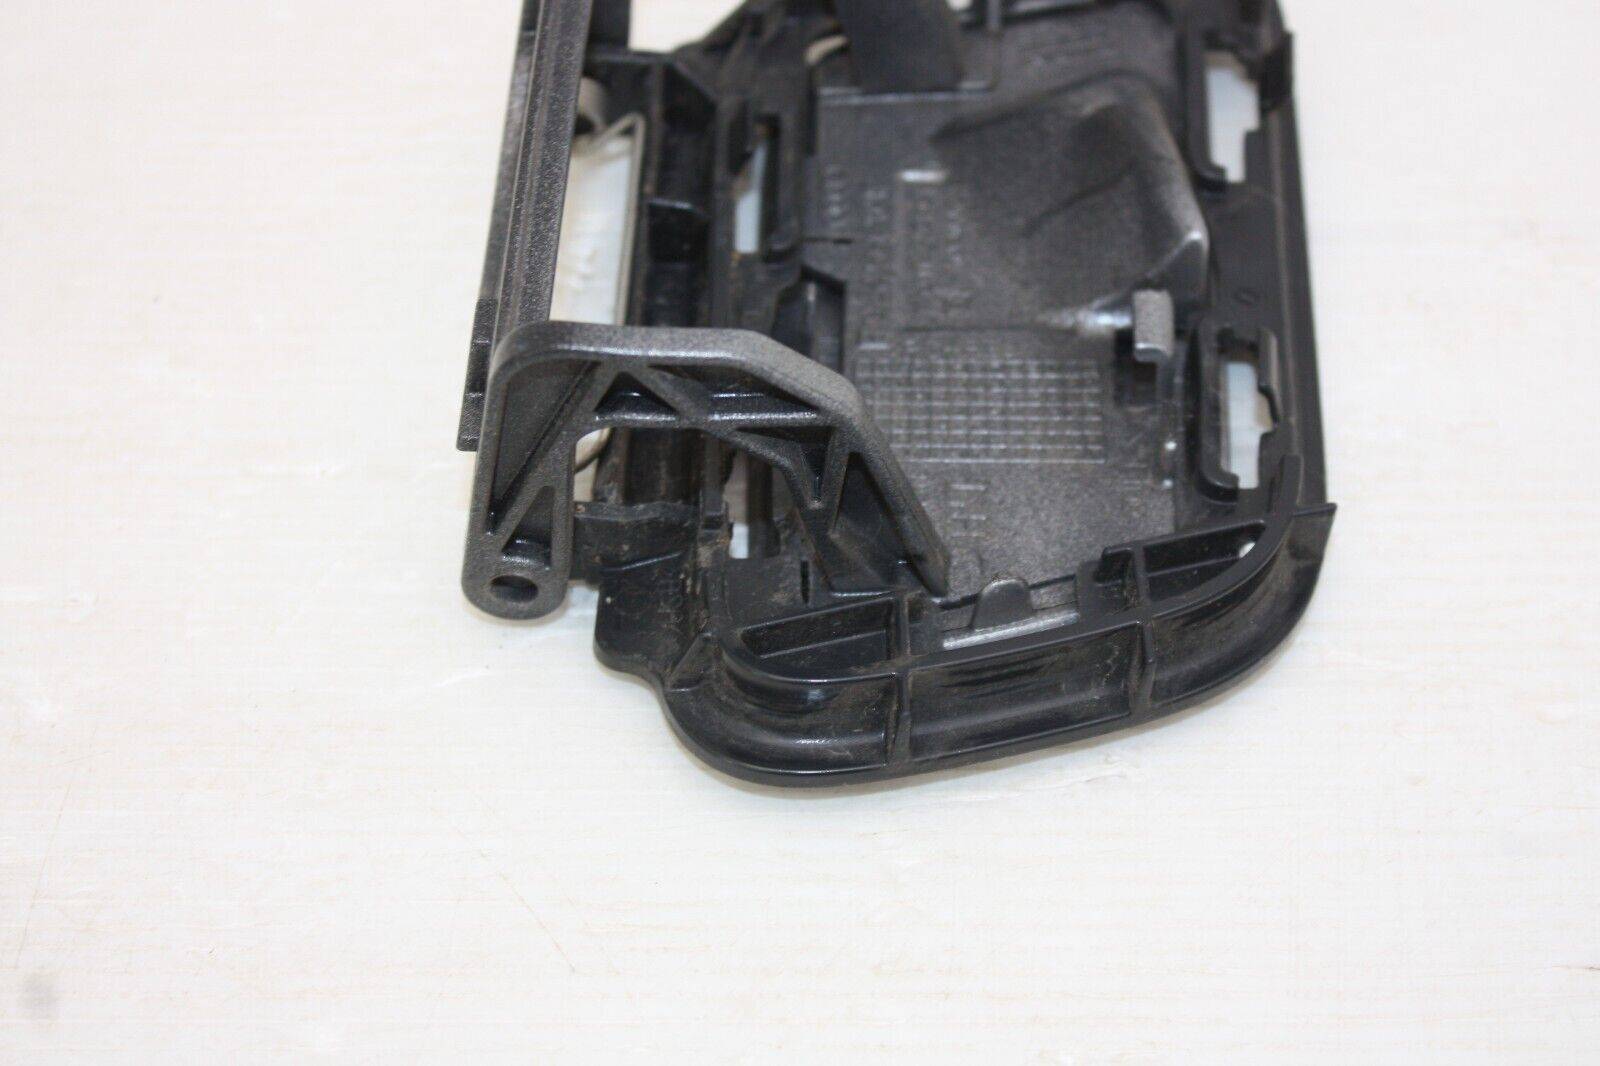 Audi-A4-B8-S-Line-Front-Bumper-Left-Shower-Cover-2012-TO-2015-8K0955275H-Genuine-175660065897-5